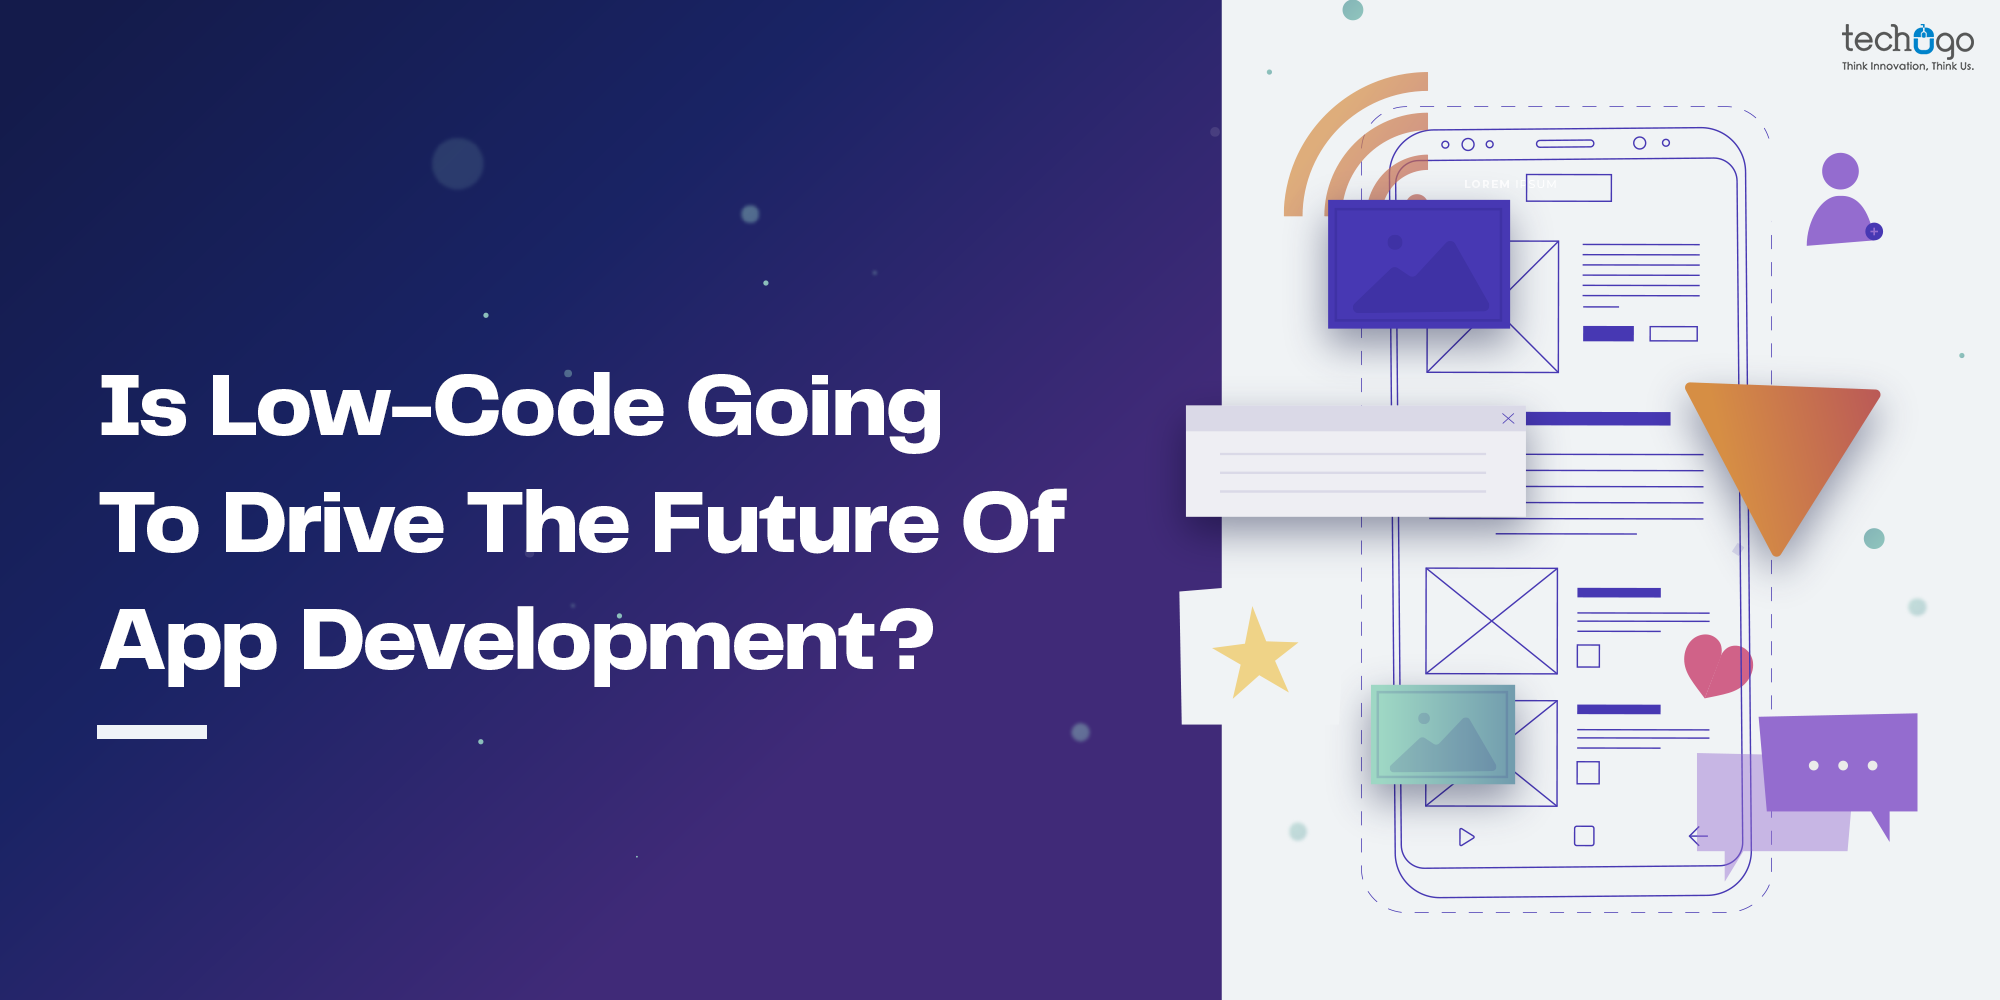 IS LOW-CODE GOING TO DRIVE THE FUTURE OF APP DEVELOPMENT?